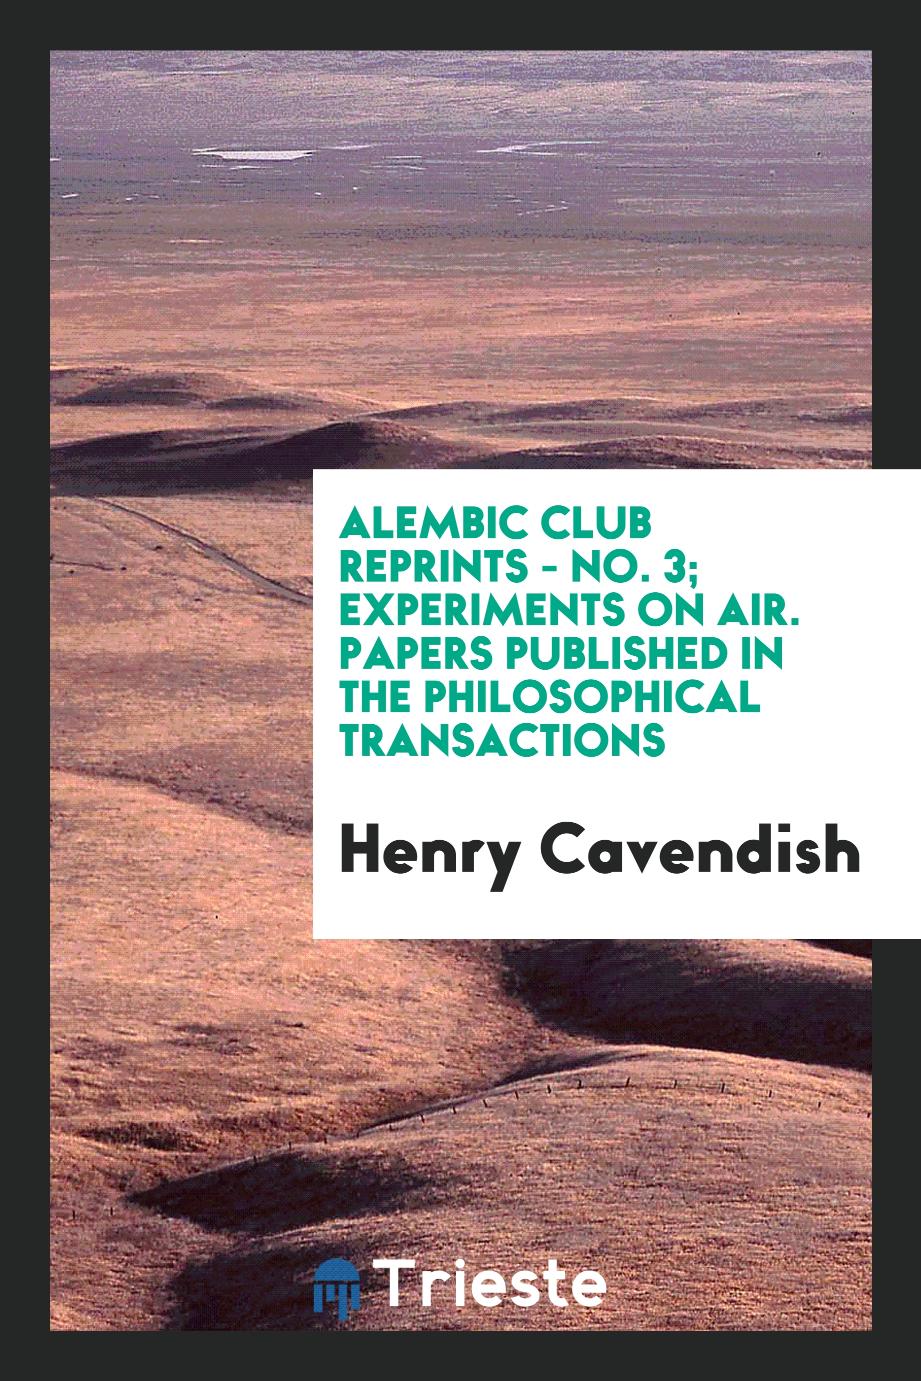 Alembic Club Reprints - No. 3; Experiments on Air. Papers Published in the Philosophical Transactions